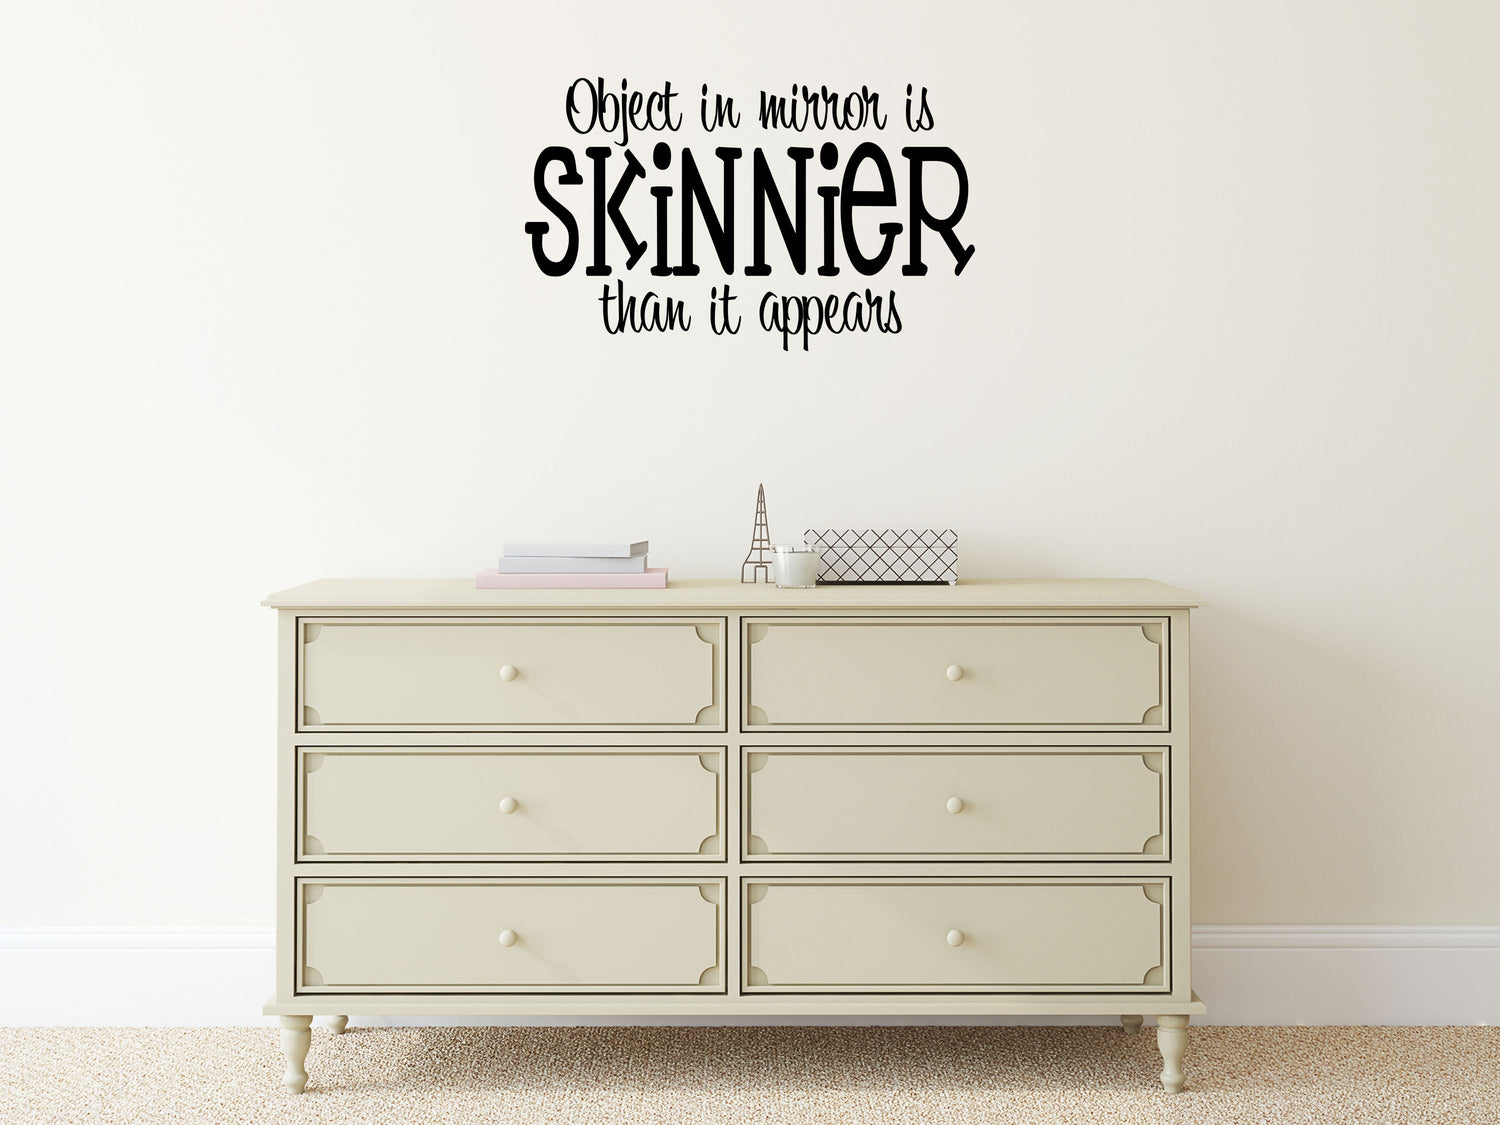 Object In Mirror Vinyl Wall Decal Inspirational Wall Signs 